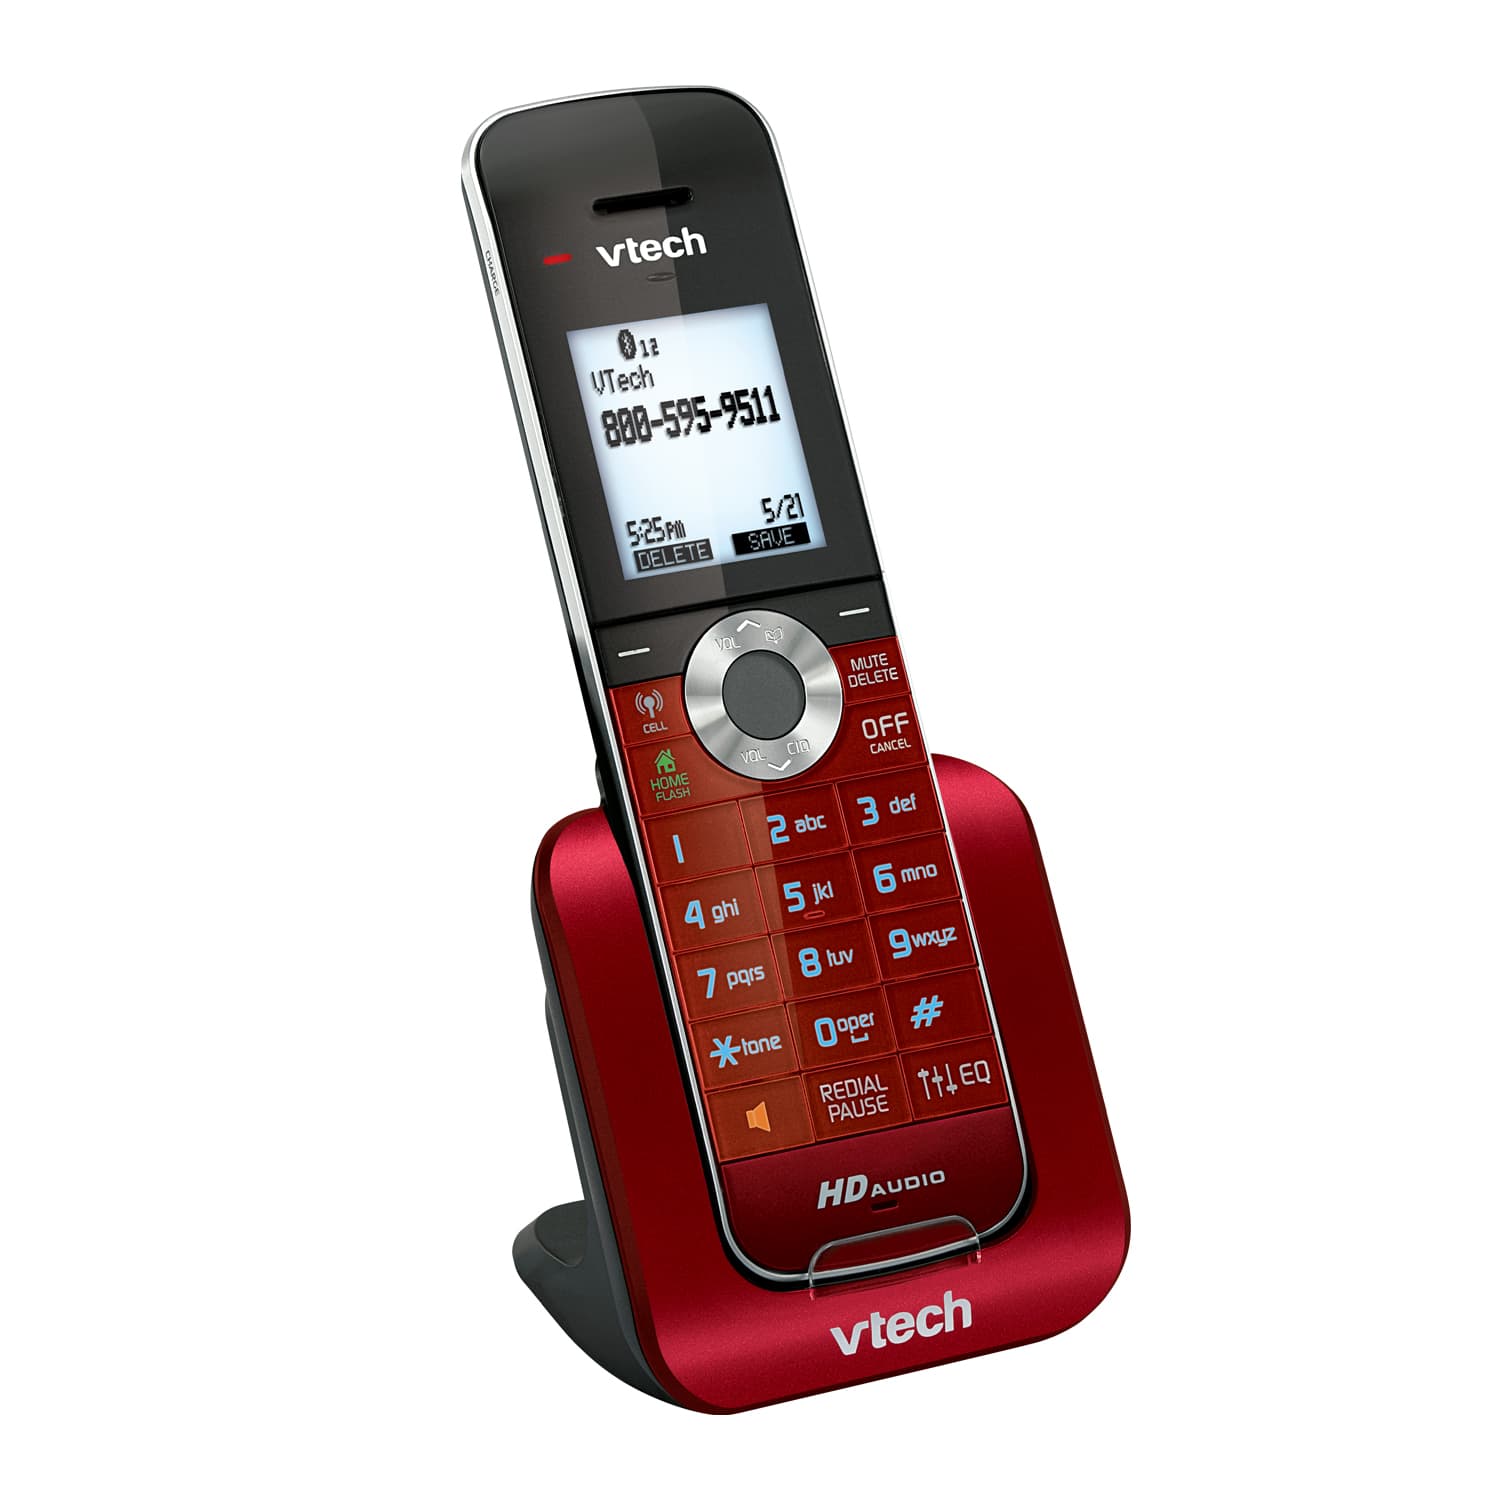 6 Handset Connect to Cell™ Answering System with Caller ID/Call Waiting